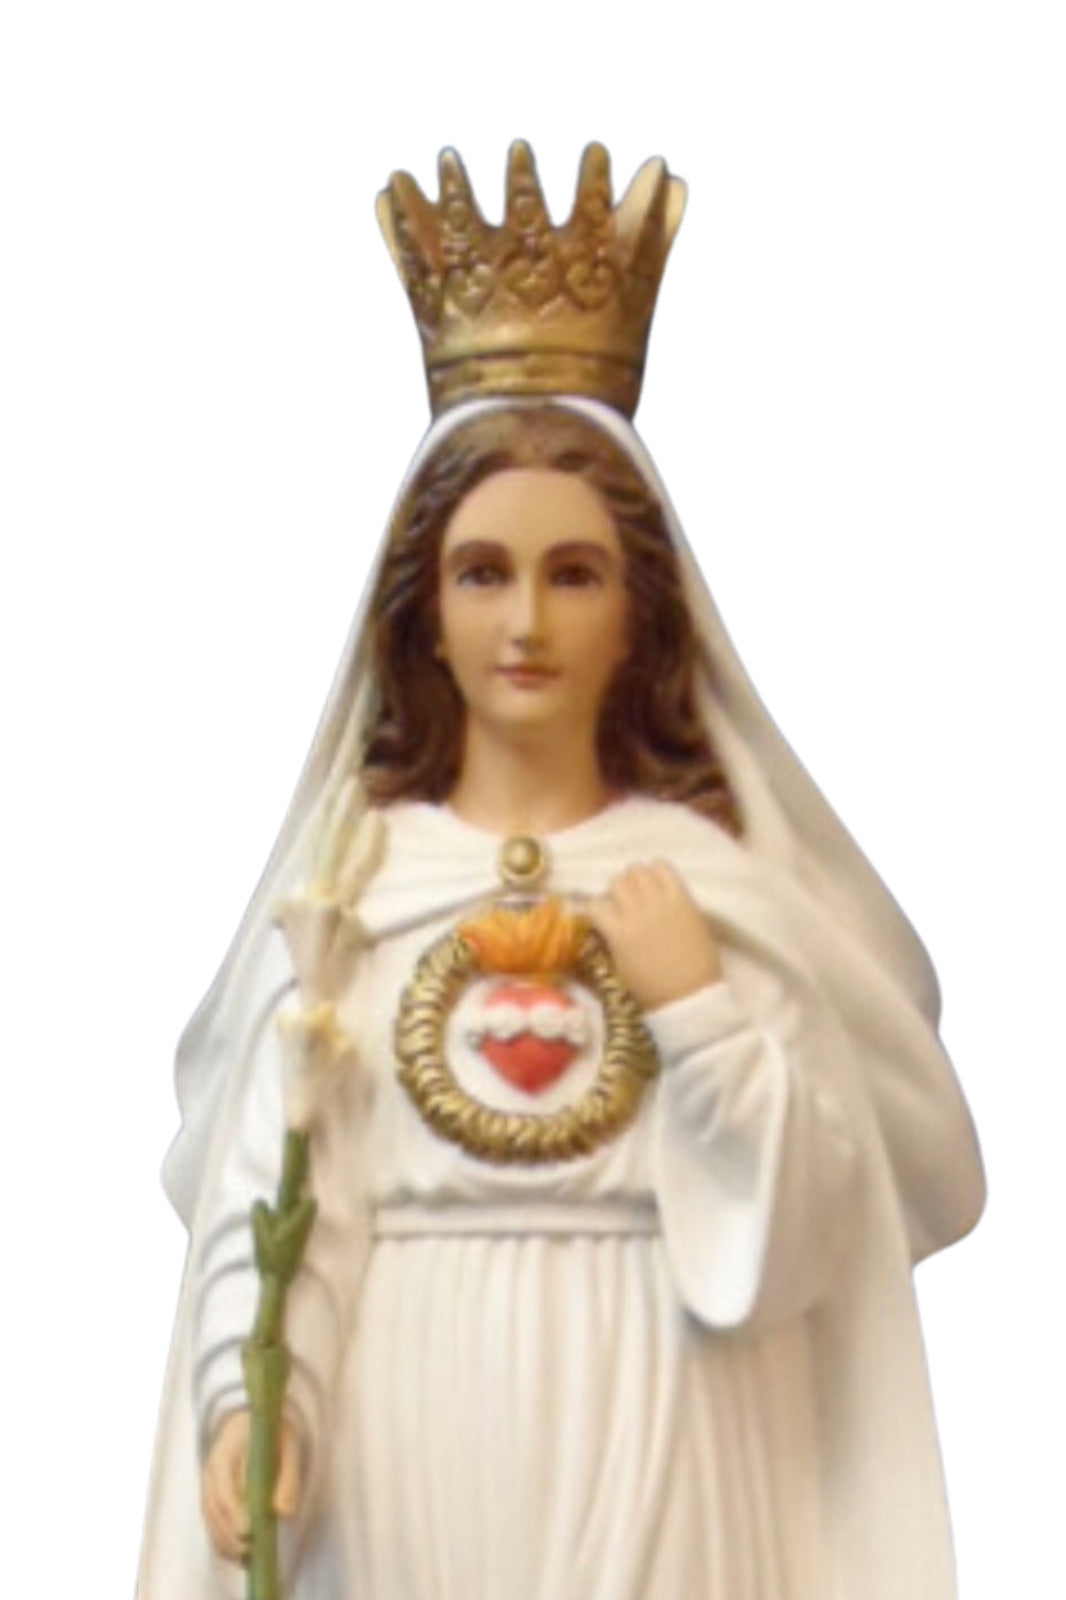 14 inch Our Lady of America Statue hand made in Colombia - Bob and Penny Lord